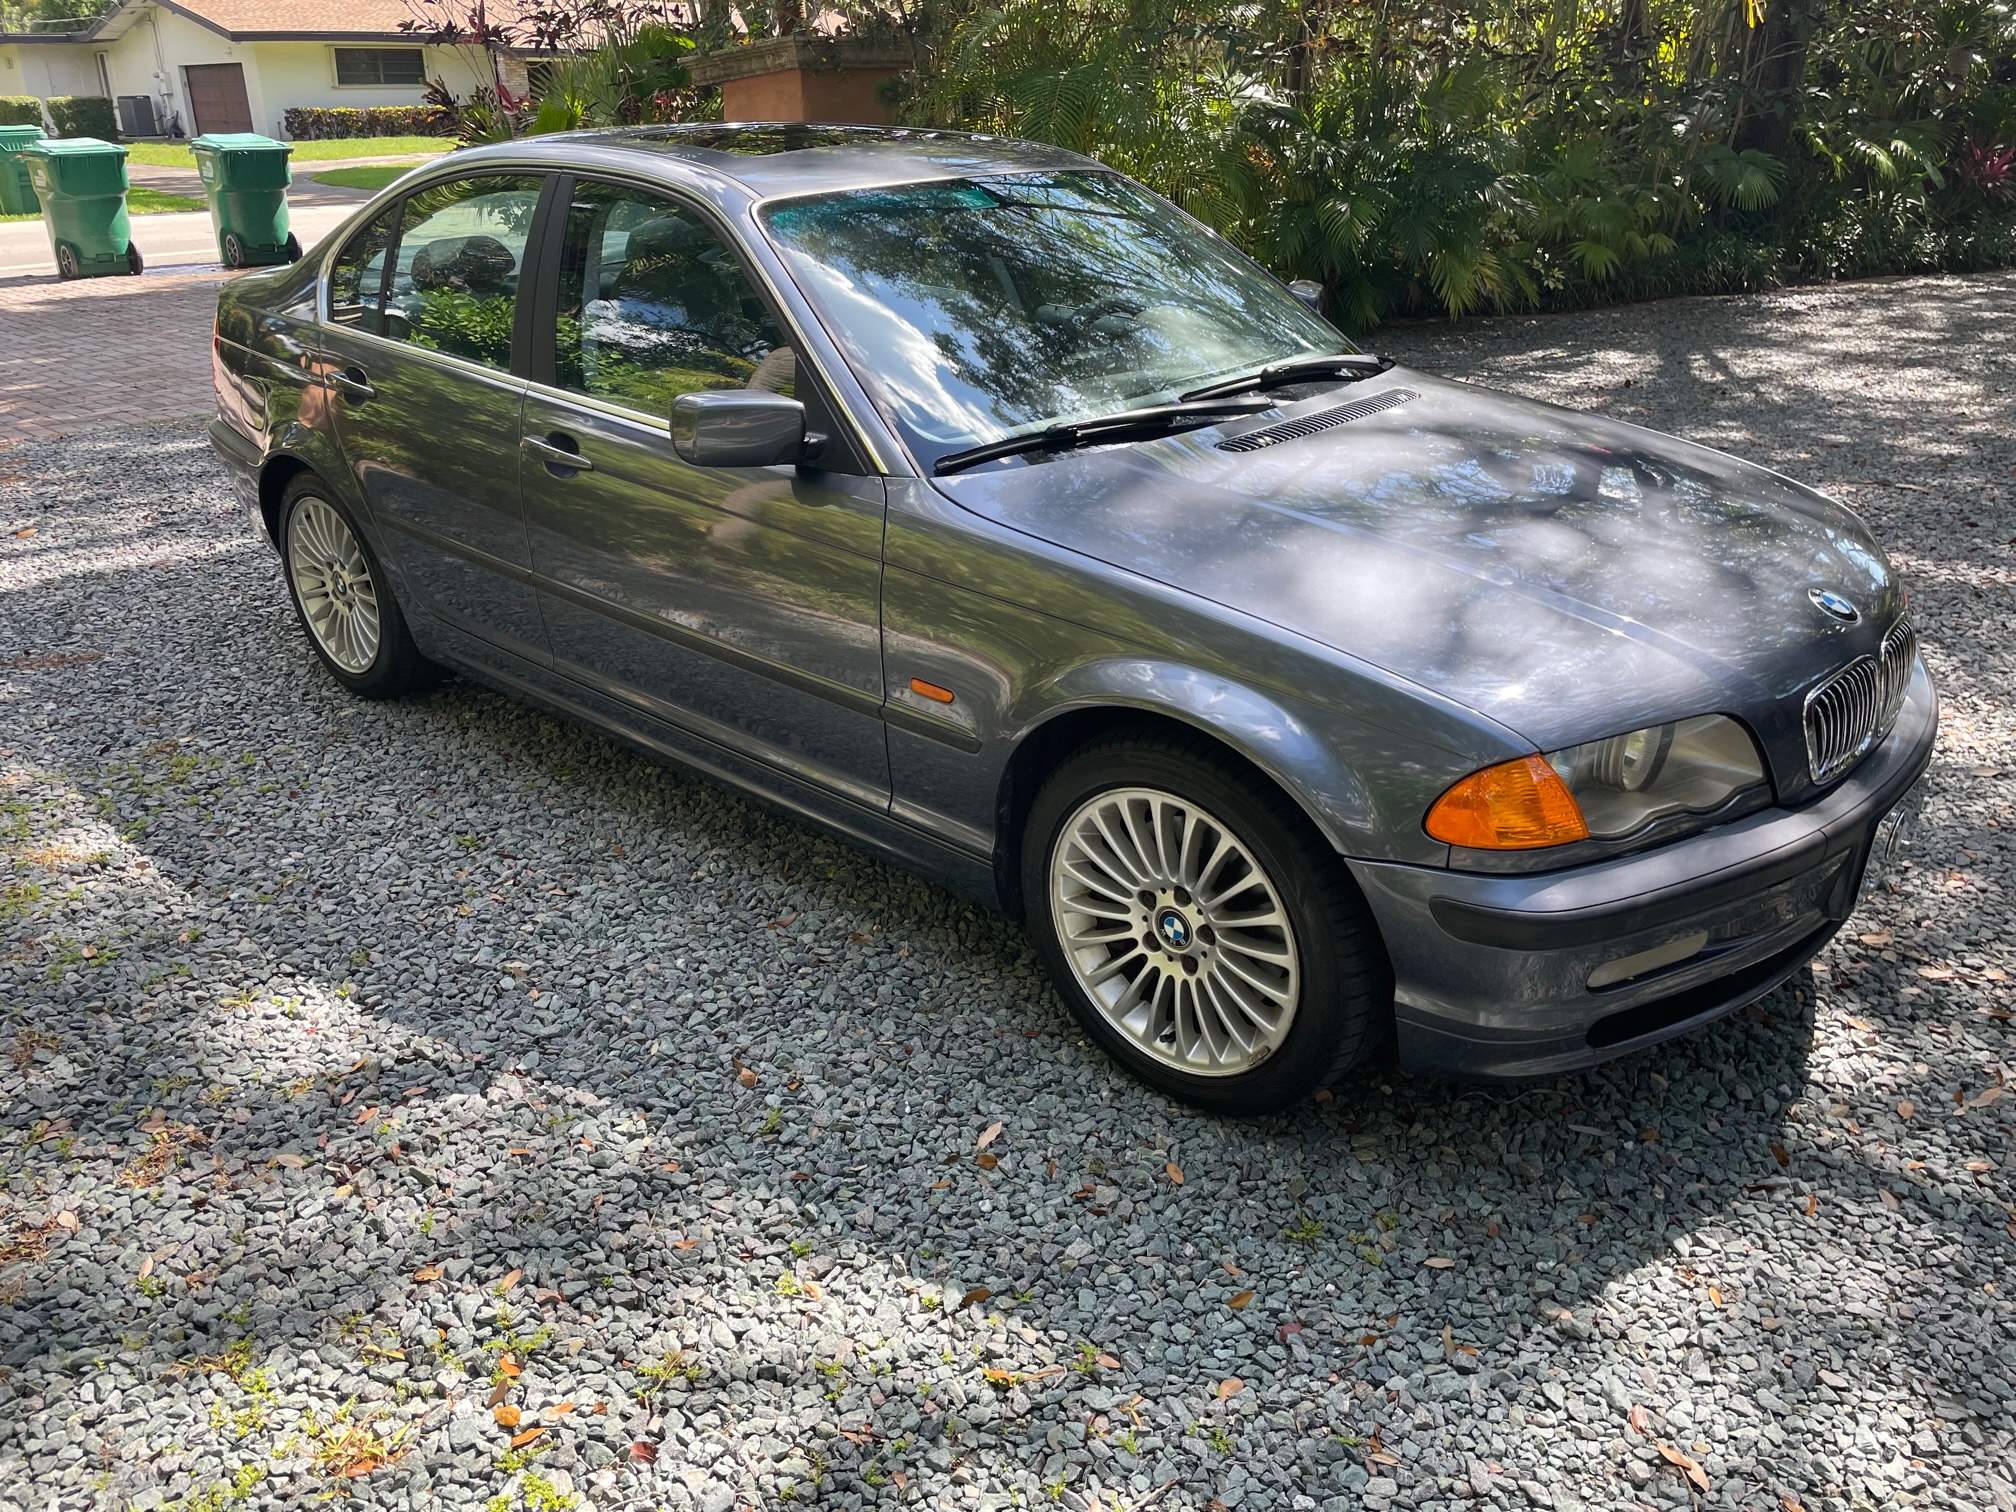 Used 2005 BMW 330i for Sale Right Now - Autotrader